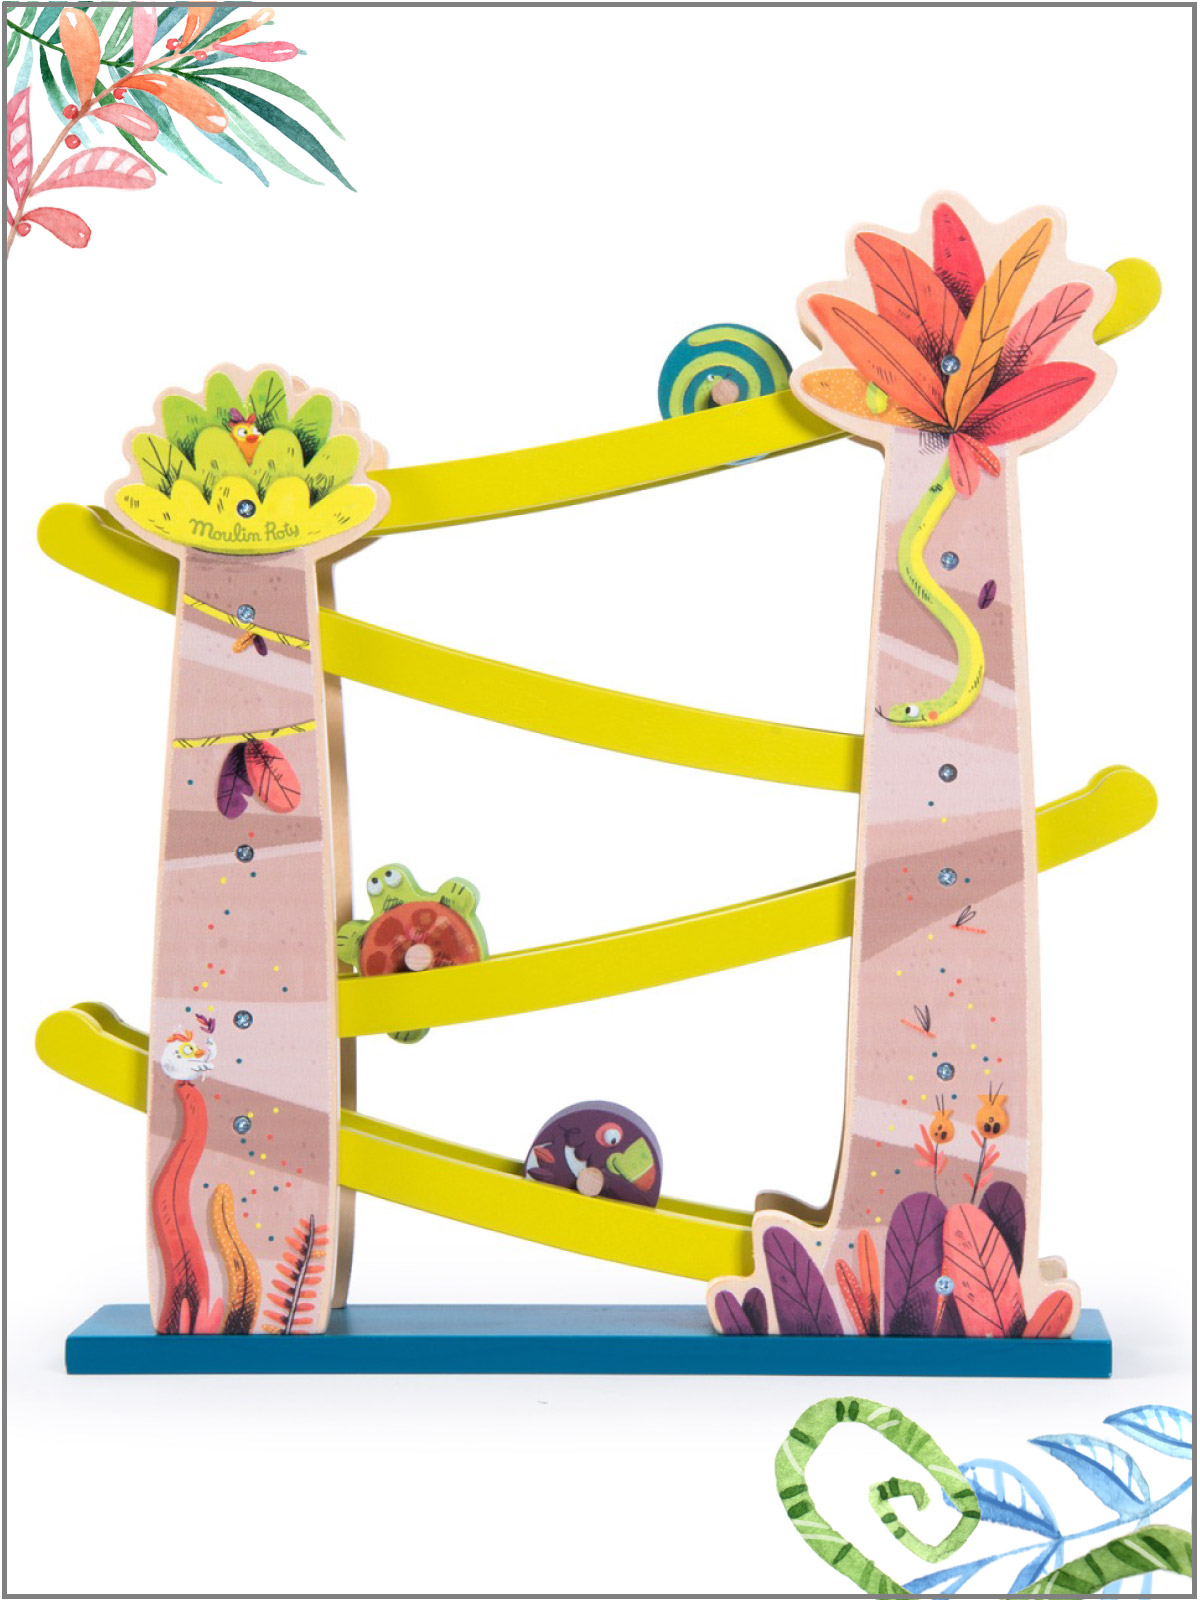 frederickandsophie-kids-toys-moulin_roty-jungle-cascade-wooden-play